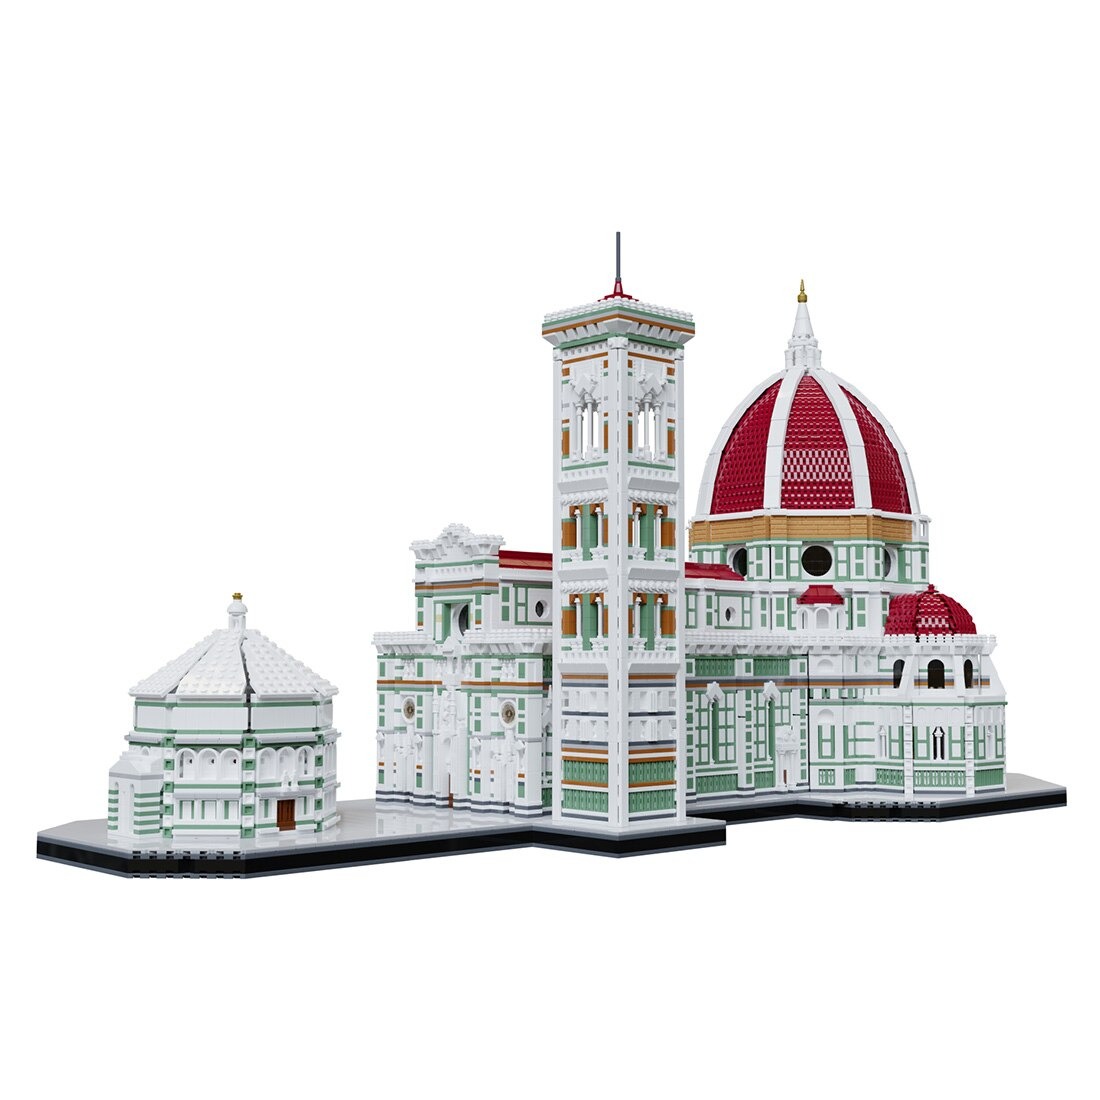 Florence Cathedral MOC-89518 Modular Building With 16118PCS